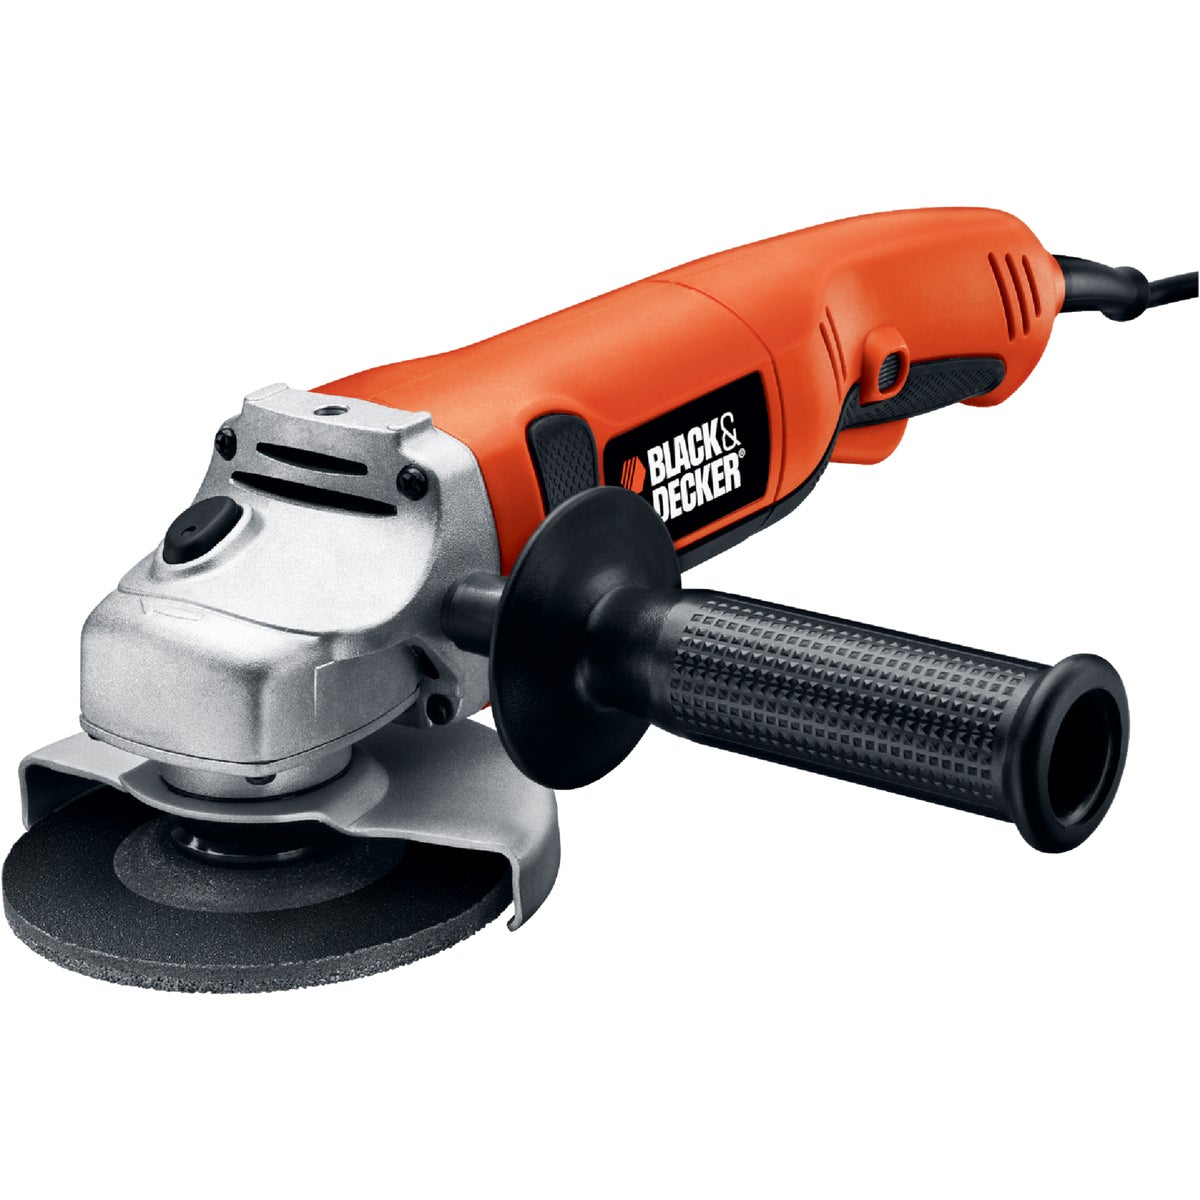 Black & Decker G750 4-1/2-Inch Small Angle Grinder - Power Angle